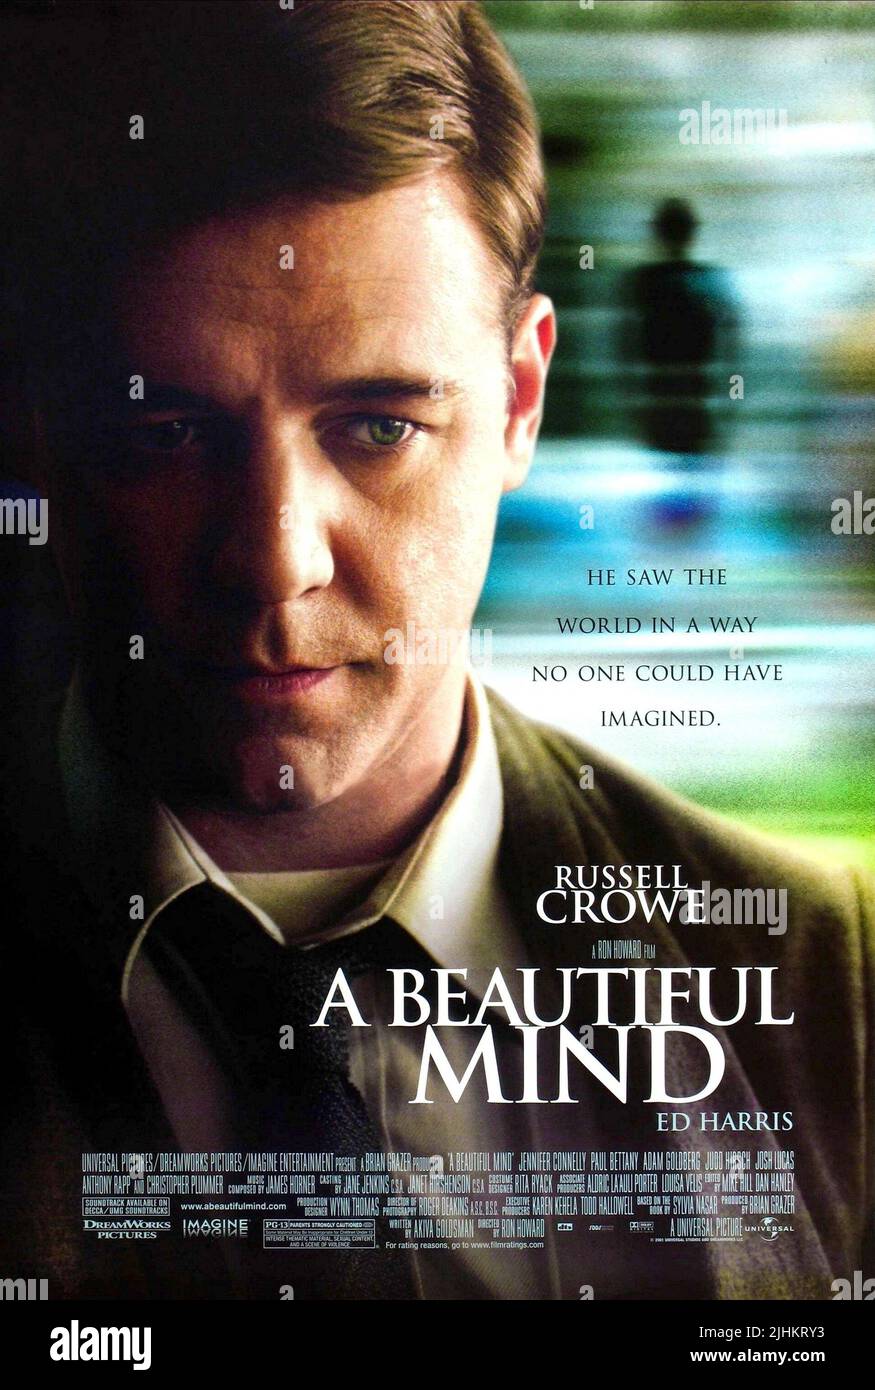 RUSSELL CROWE POSTER, A BEAUTIFUL MIND, 2001 Stock Photo